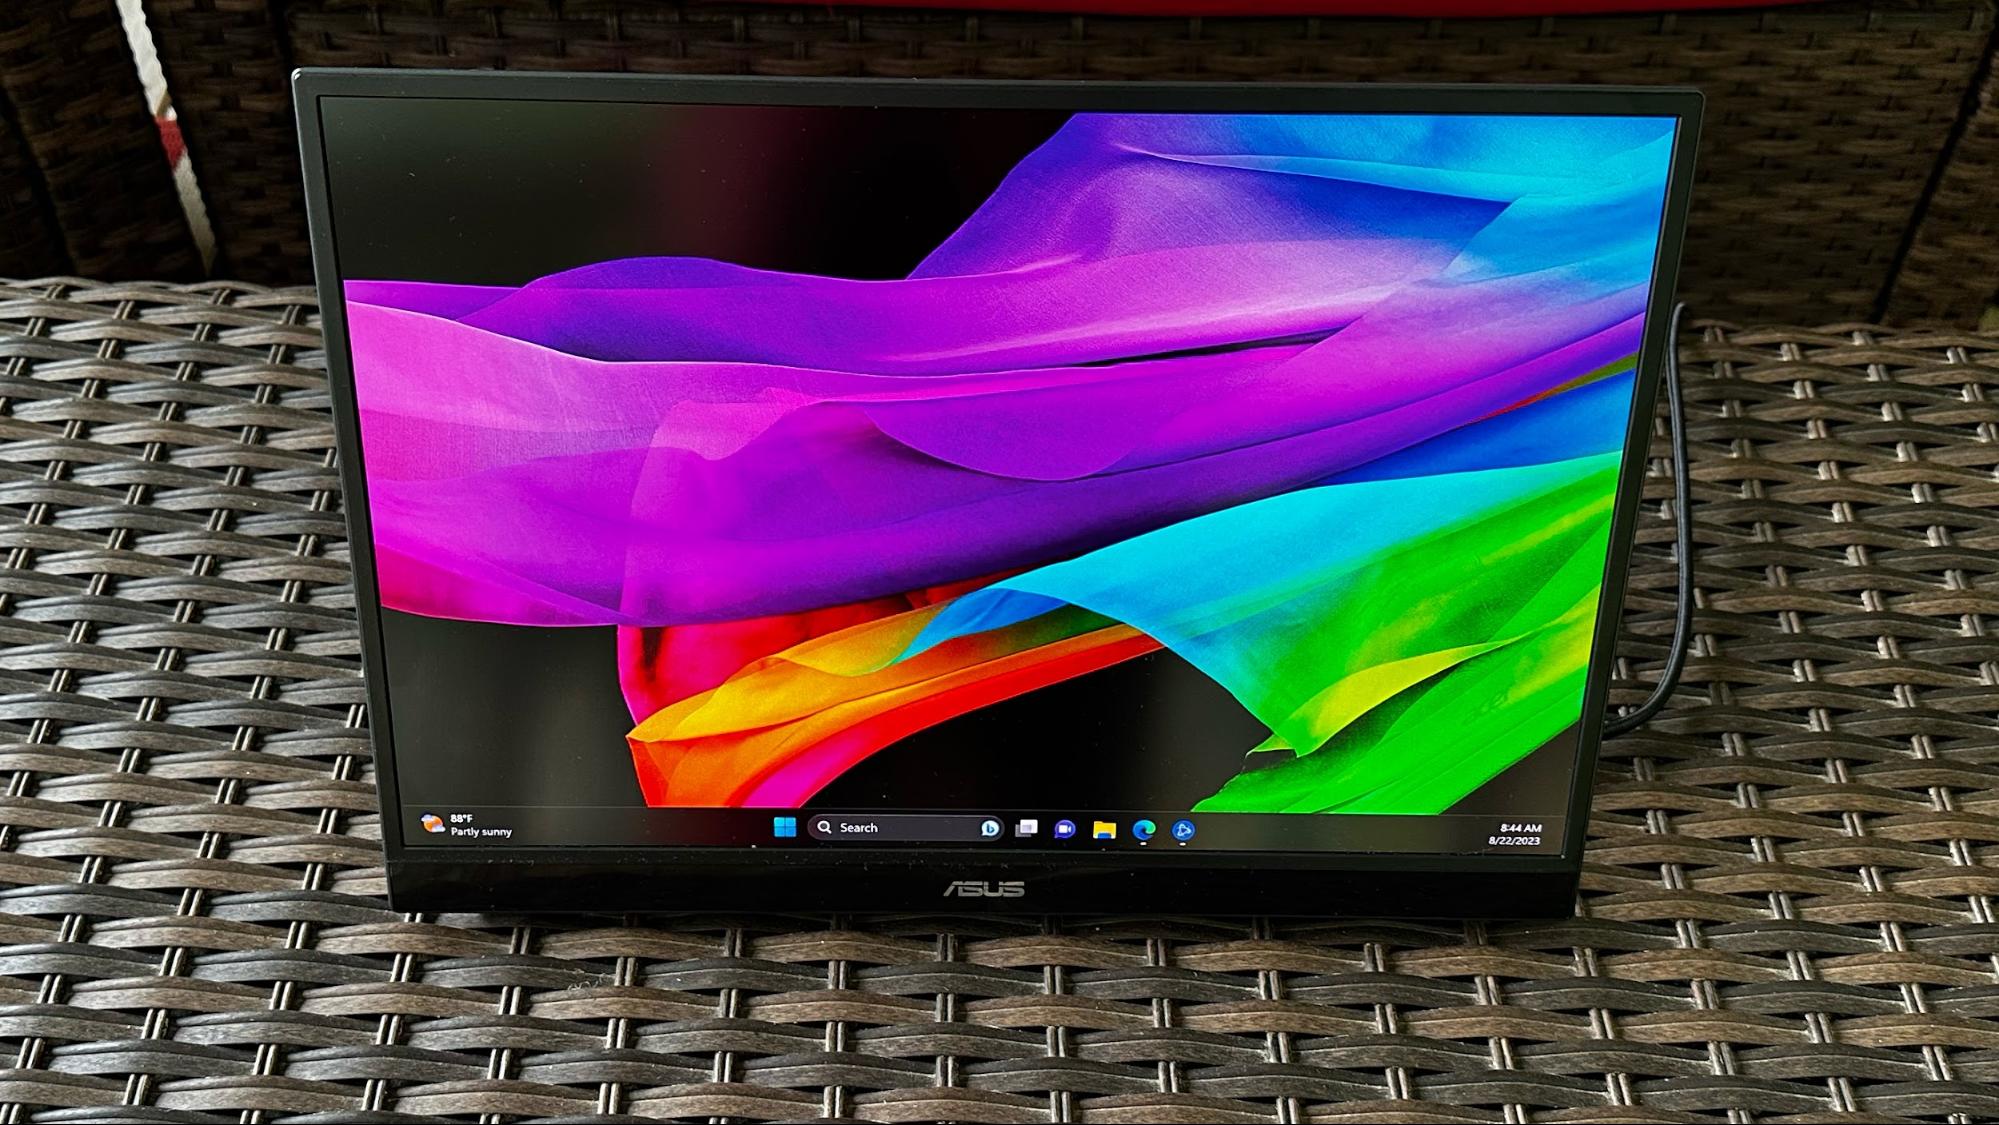 The ZenScreen portable display family gets faster and larger - Edge Up